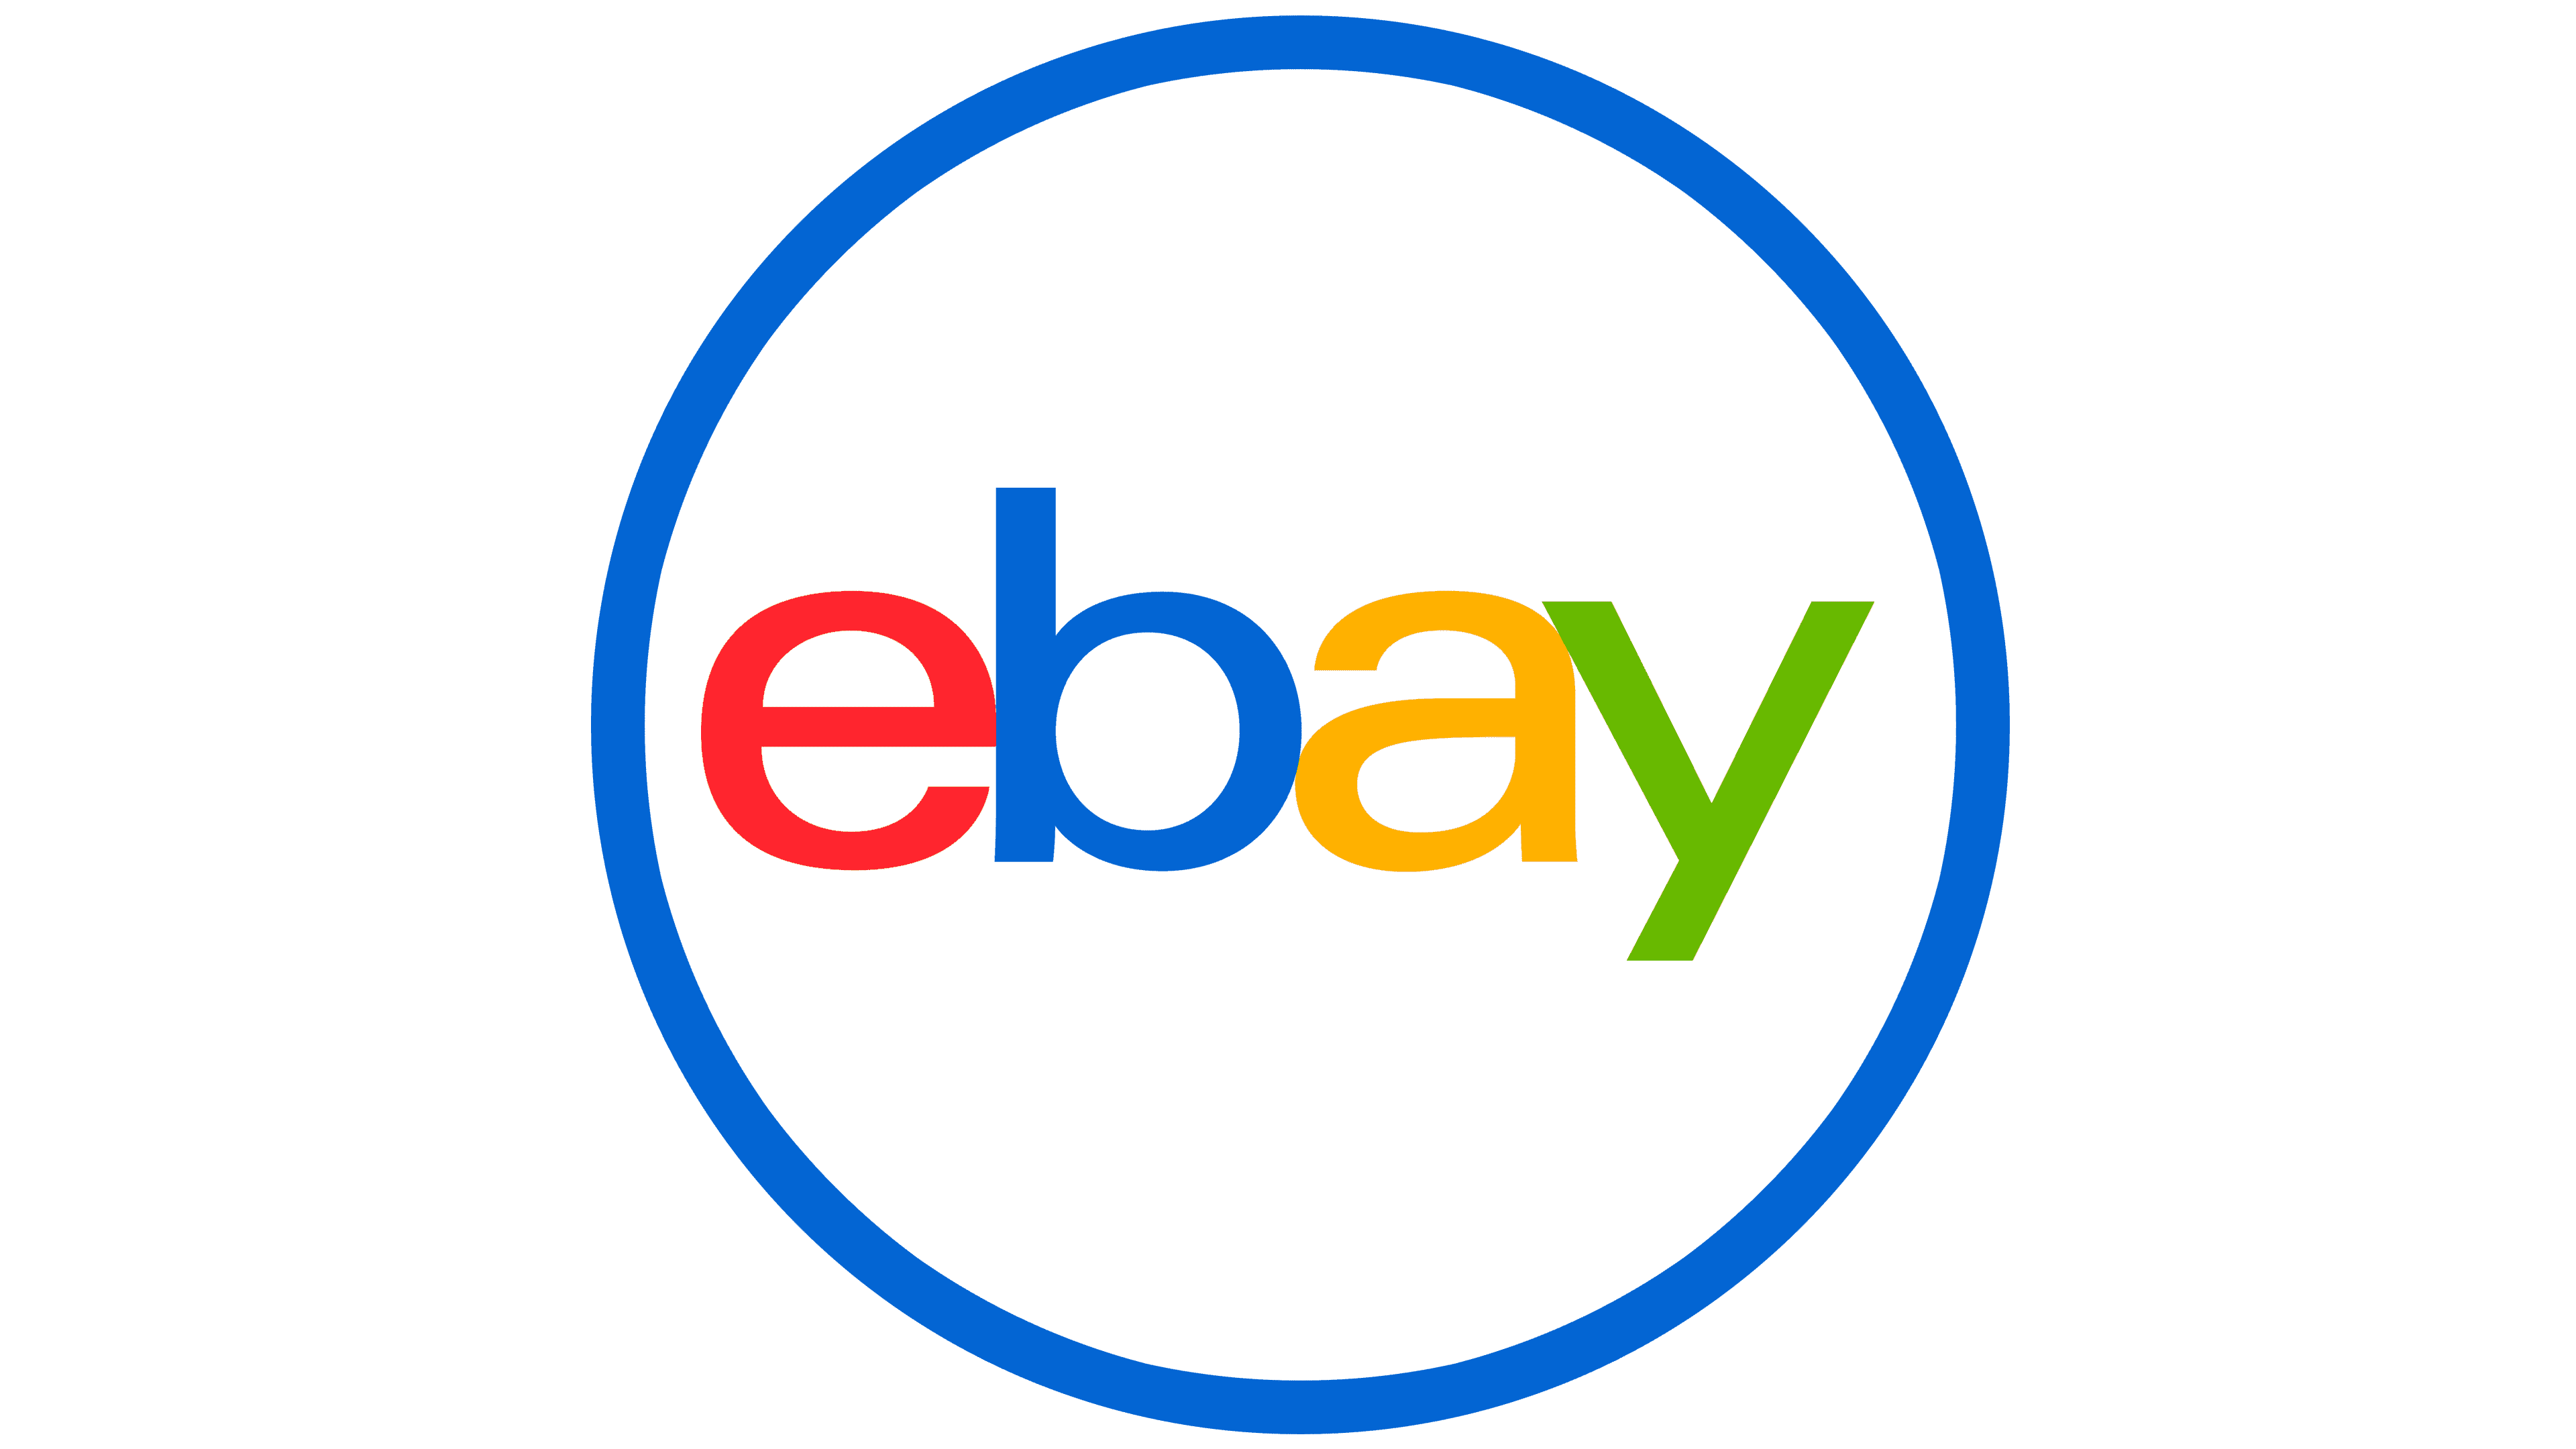 eBay Logo and symbol, meaning, history, sign.